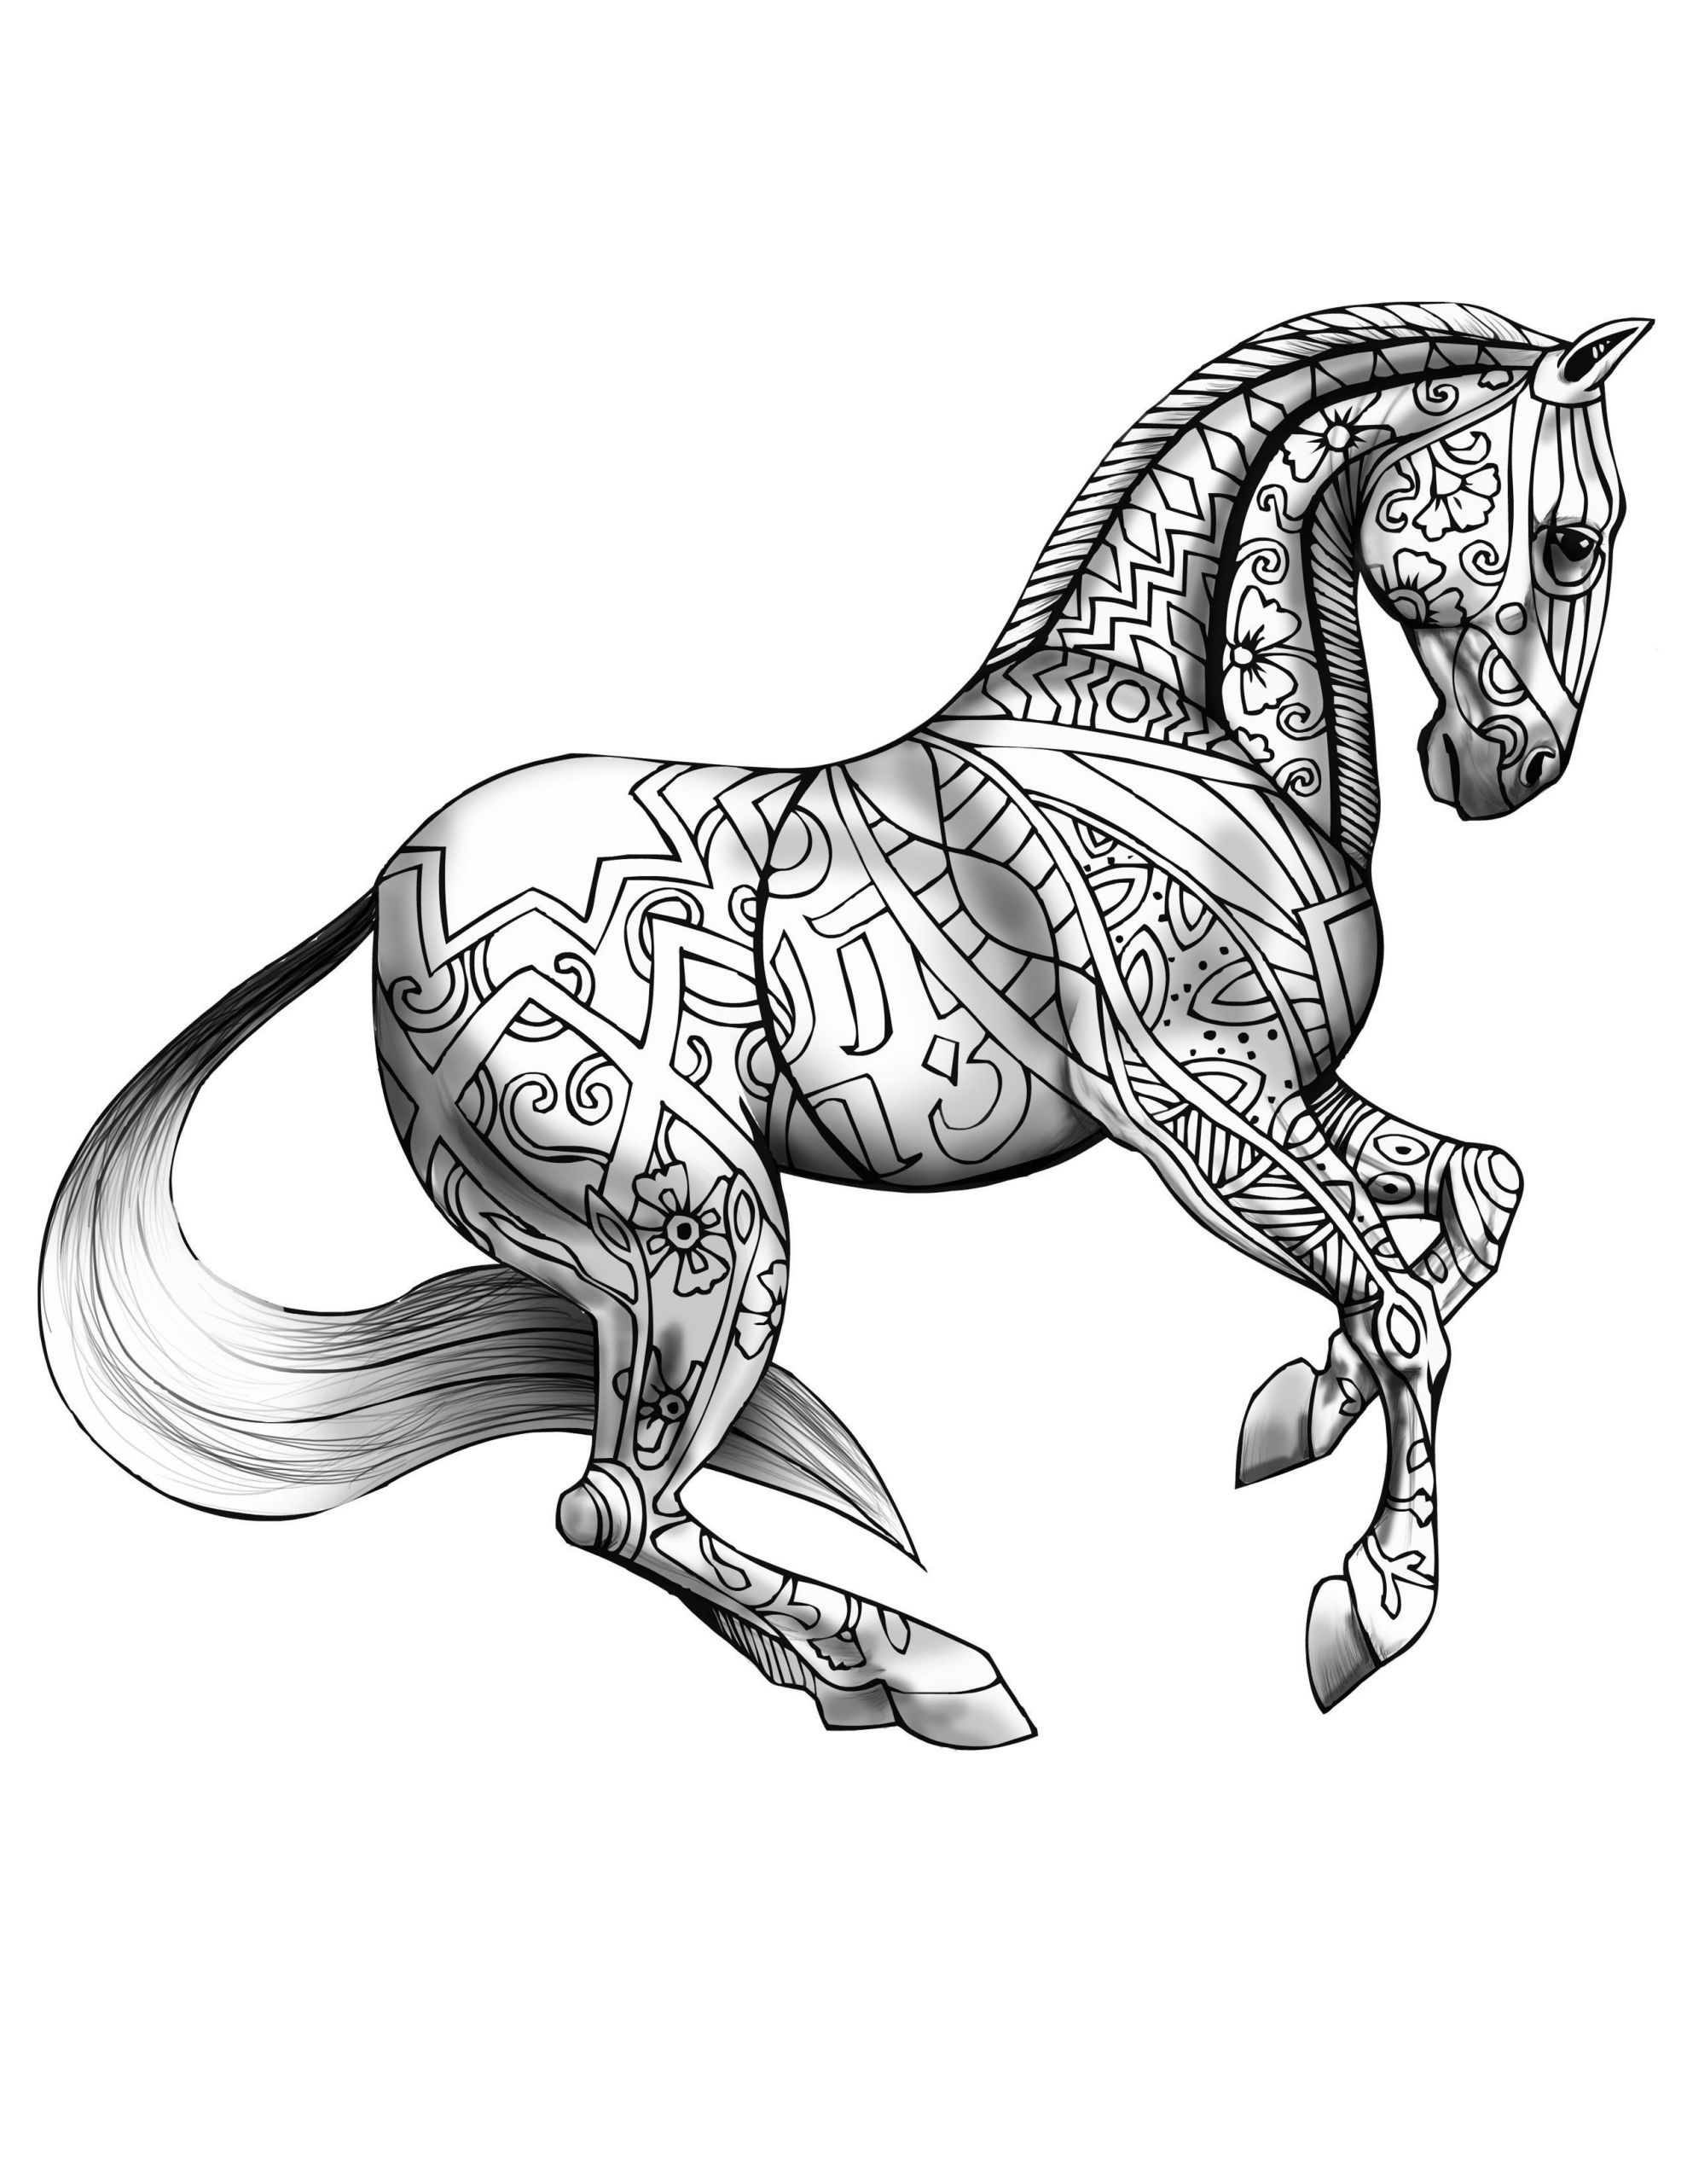 Horse Coloring Pages For Adults
 Horse Coloring Pages for Adults Best Coloring Pages For Kids